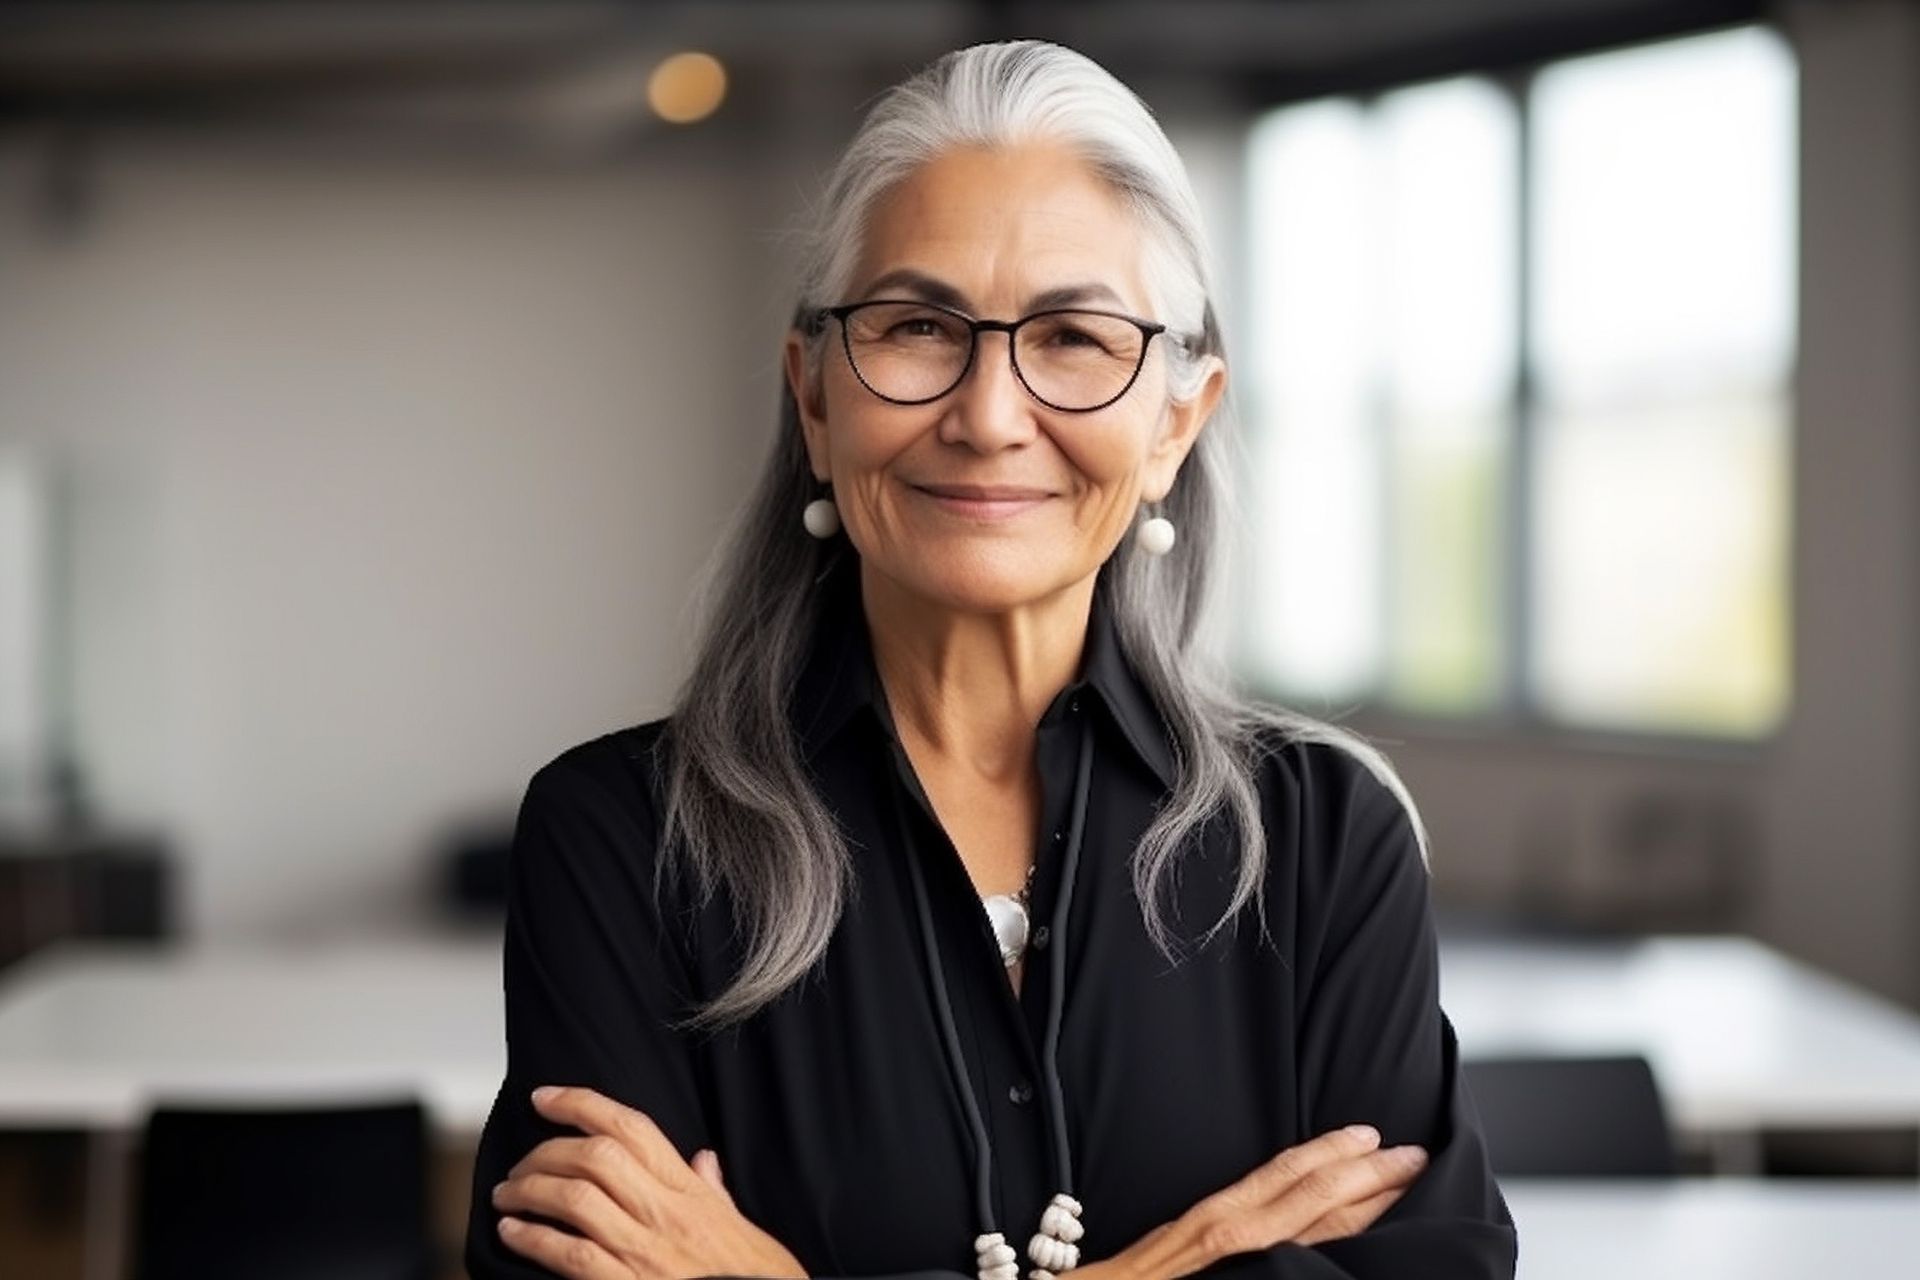 grey haired woman smiling, with arms crossed